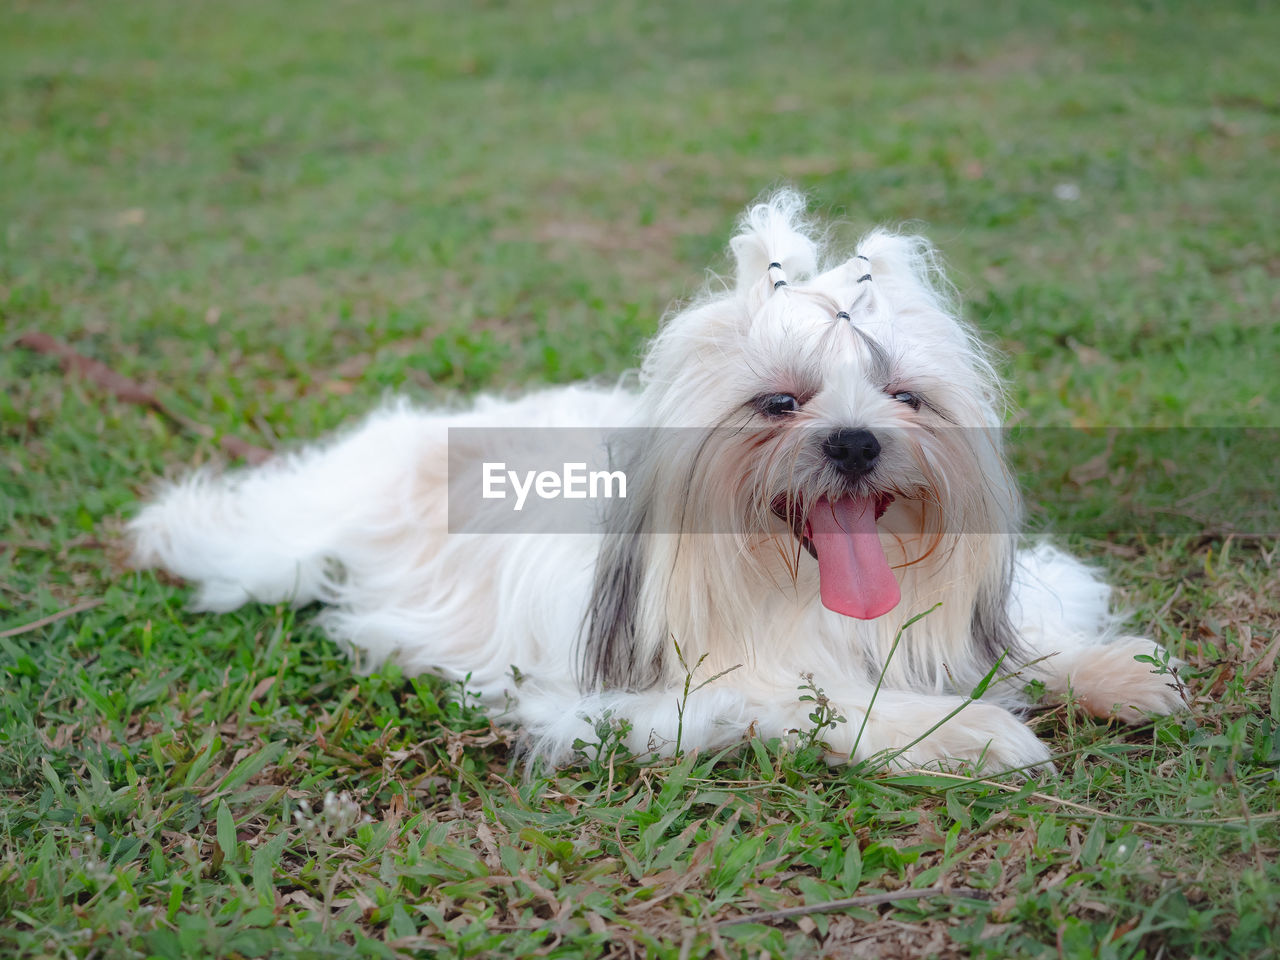 animal themes, pet, animal, one animal, mammal, domestic animals, canine, dog, grass, maltese, havanese, löwchen, plant, facial expression, portrait, white, bichon, relaxation, sticking out tongue, no people, coton de tulear, cute, lap dog, animal hair, animal body part, west highland white terrier, nature, lying down, mouth open, looking at camera, outdoors, day, green